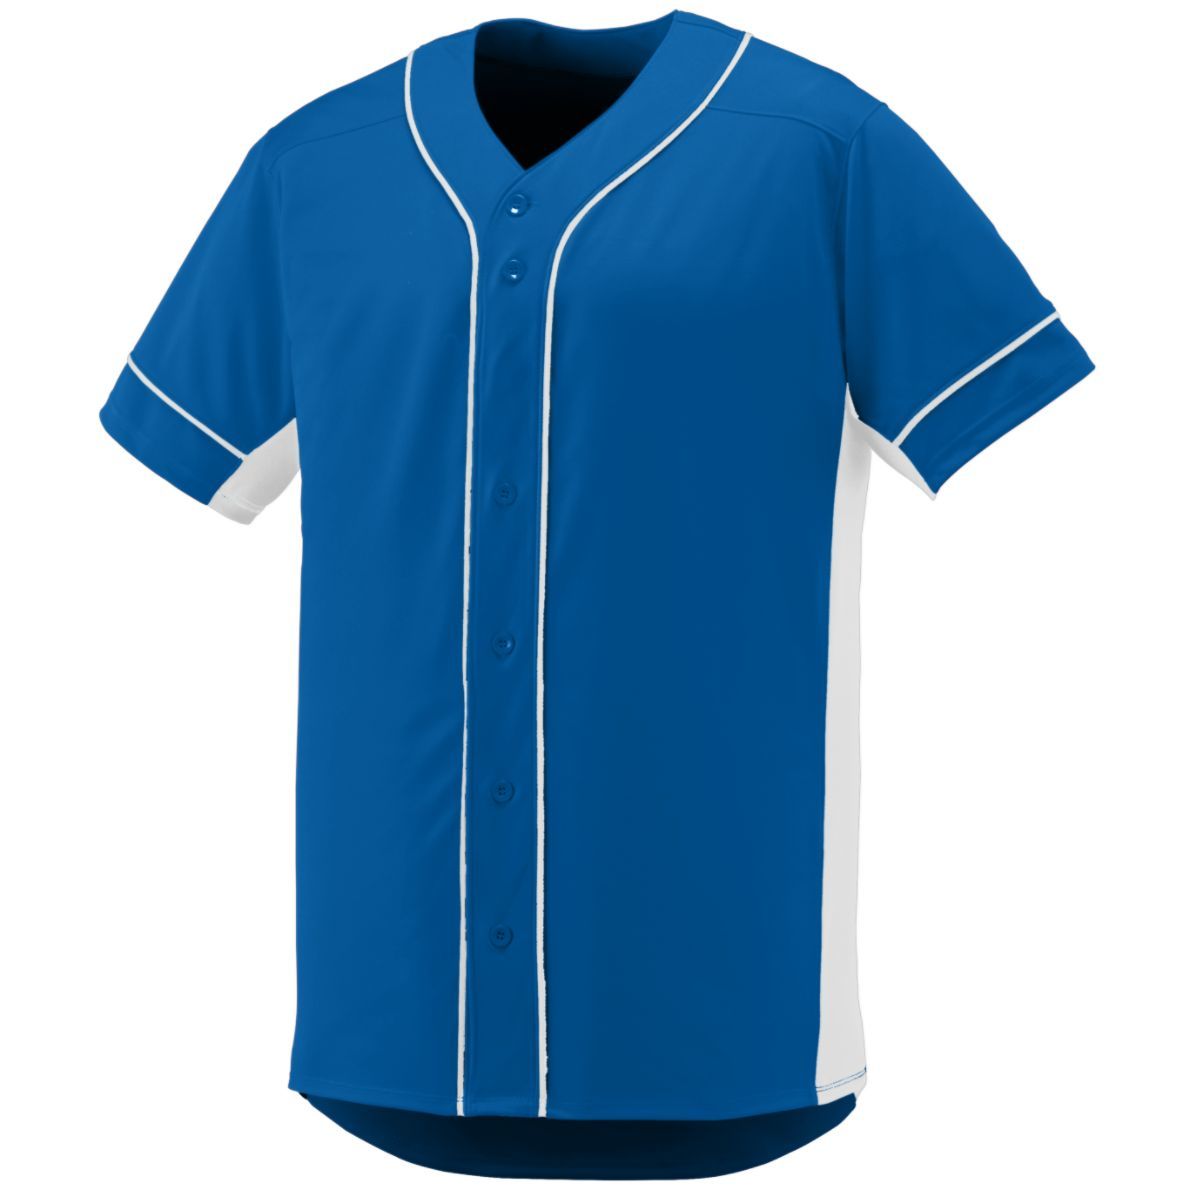 Augusta Sportswear Slugger Jersey in Royal/White  -Part of the Adult, Adult-Jersey, Augusta-Products, Baseball, Shirts, All-Sports, All-Sports-1 product lines at KanaleyCreations.com